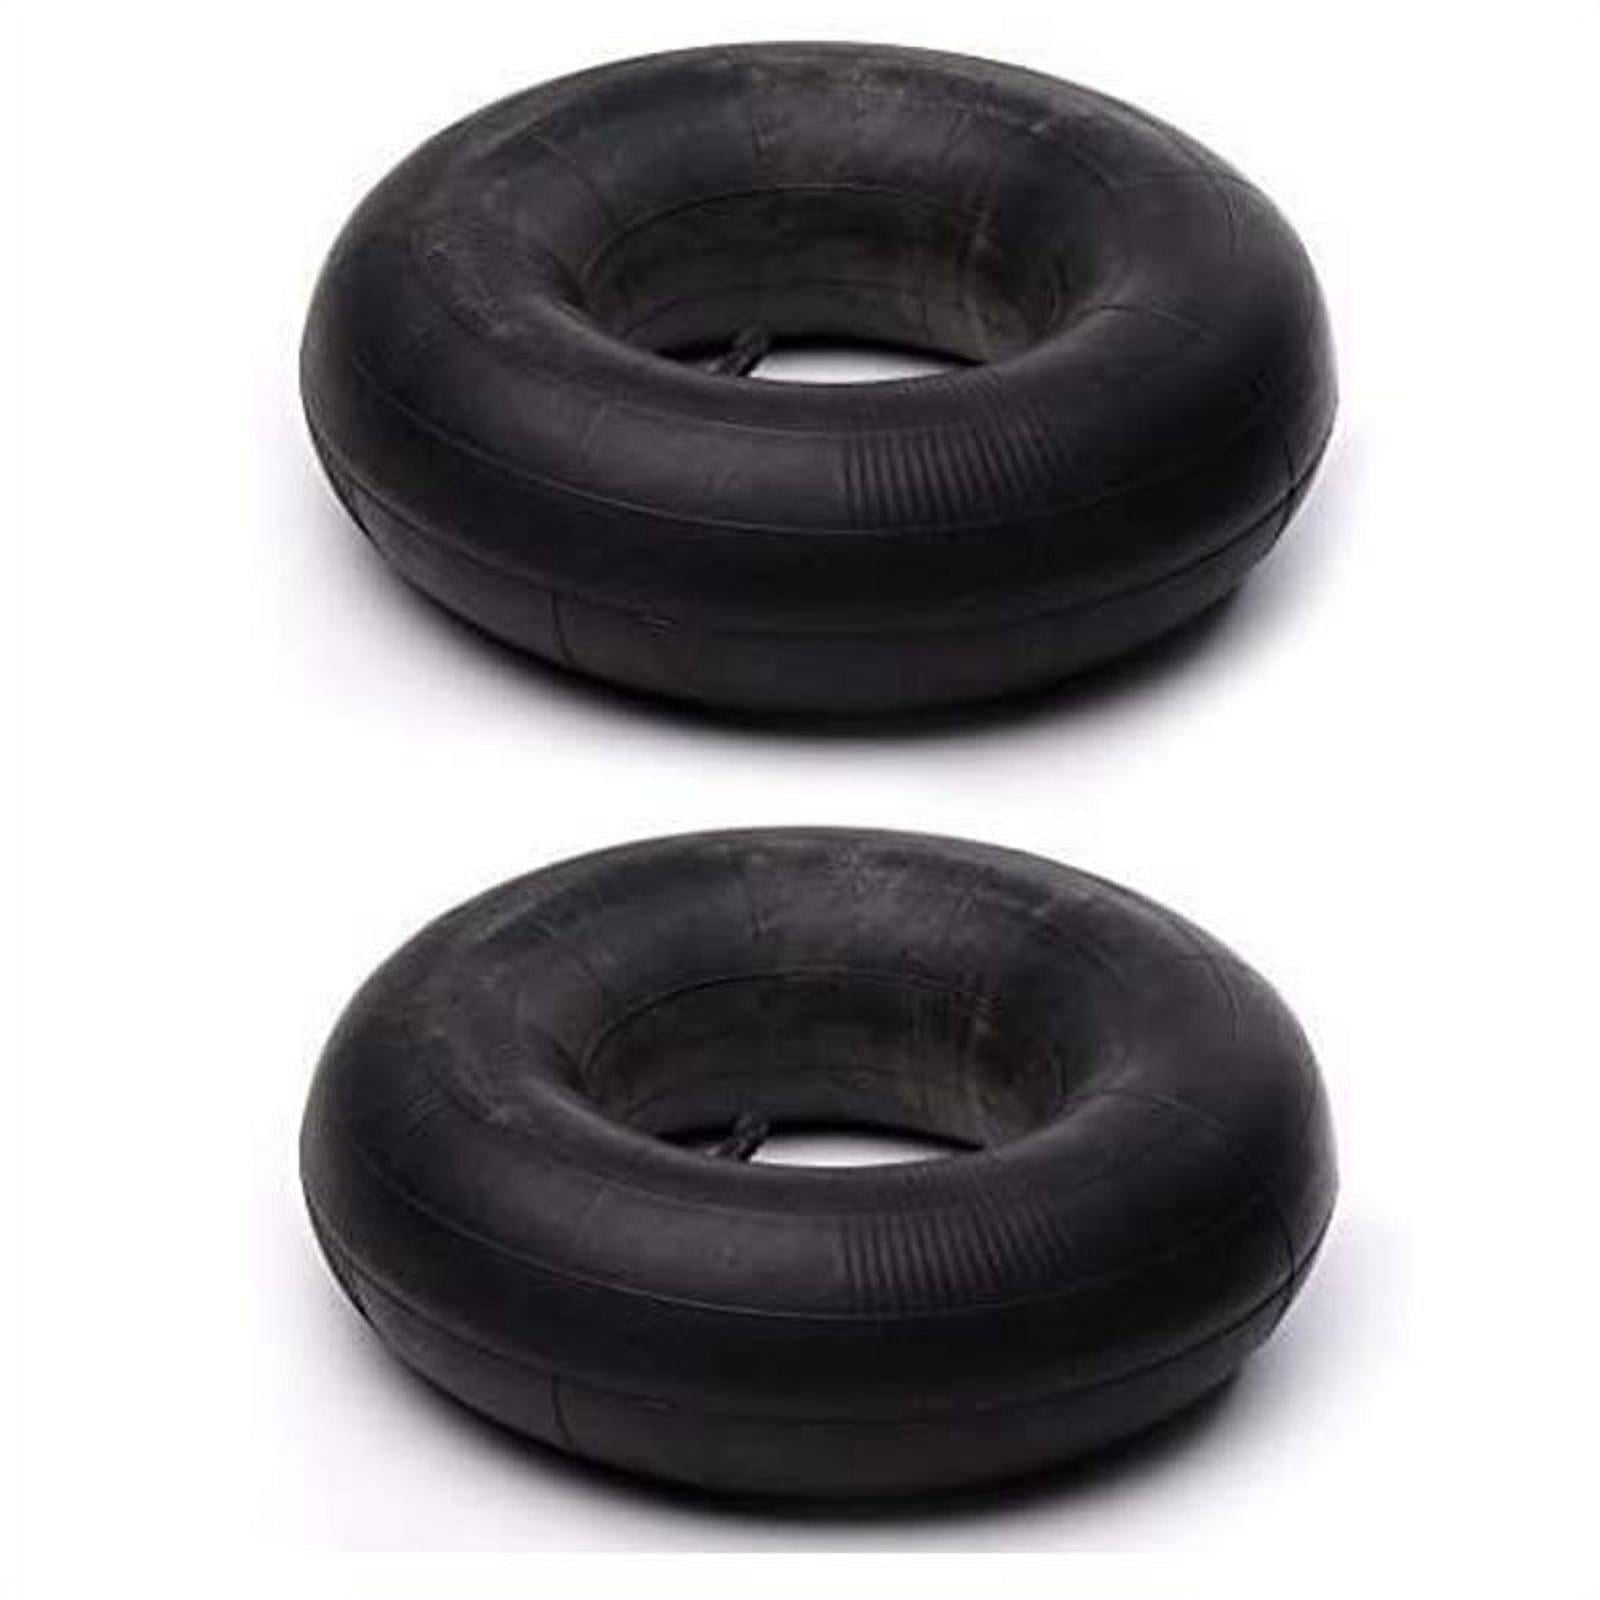 Set of Two 15X6.00-6 Lawn Tire Inner Tube 15x6x6 TR13 Lawn Mower tractor tire 